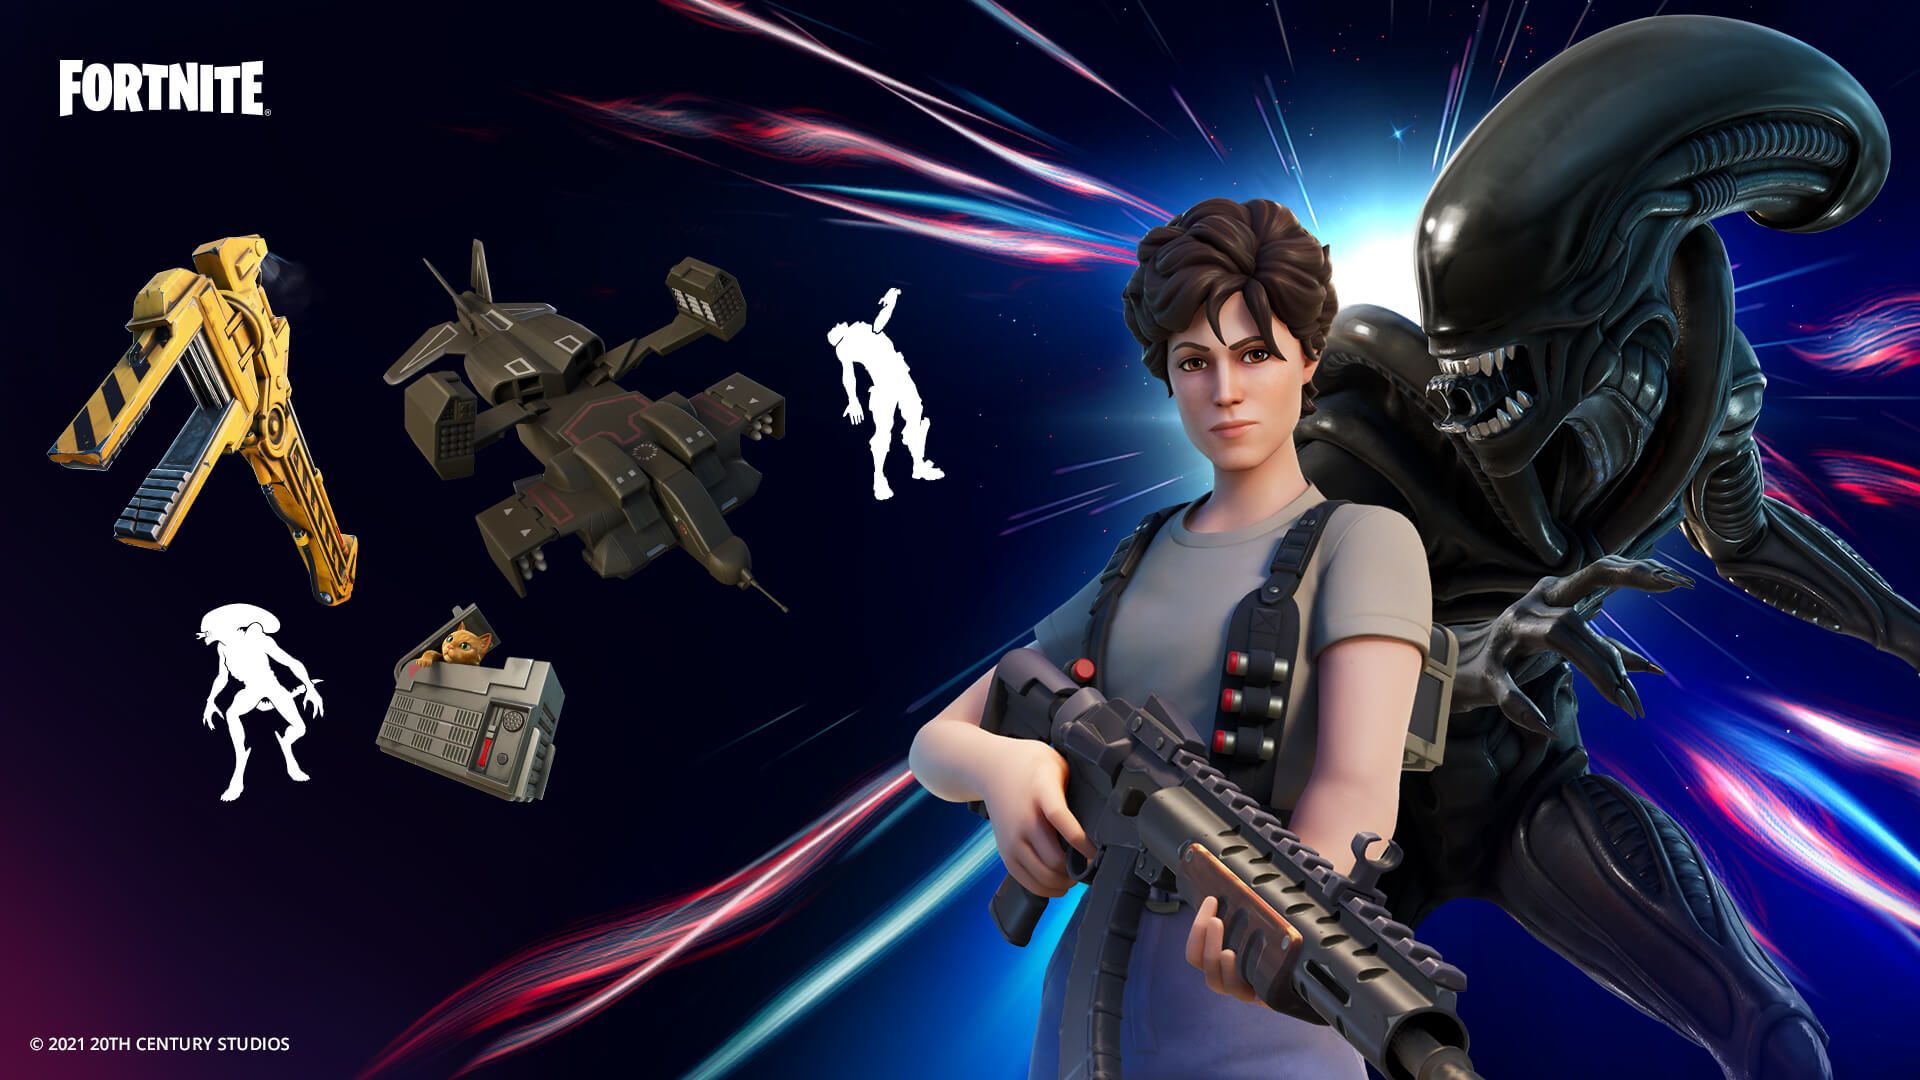 From LV 426 To Fortnite: Ripley And Xenomorph Arrive